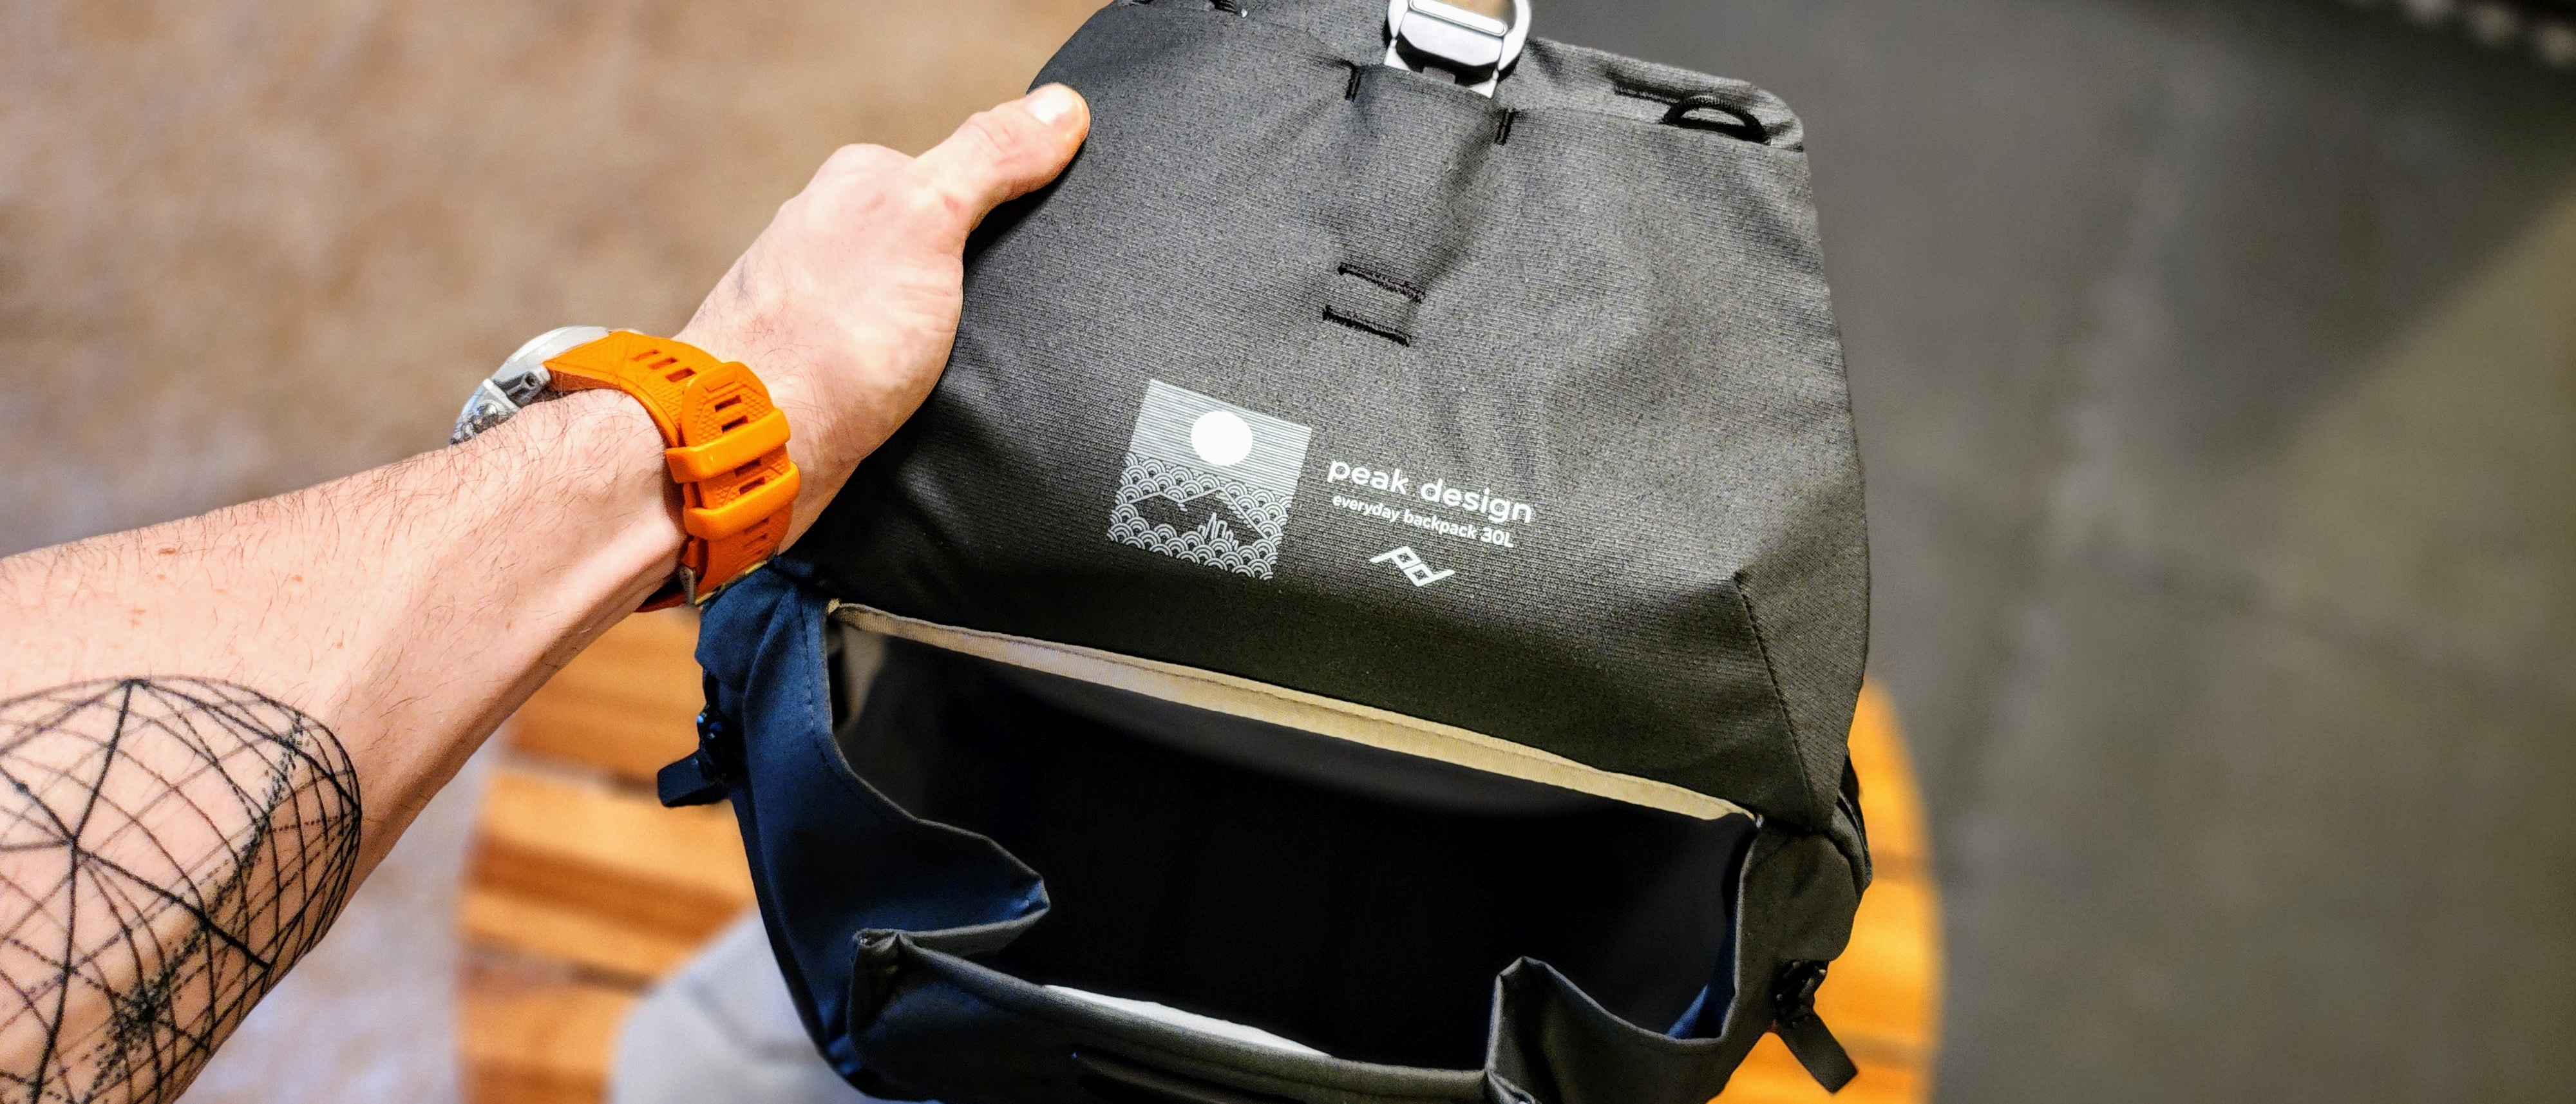 Peak Design Everyday Backpack v2 review: My new daily carry